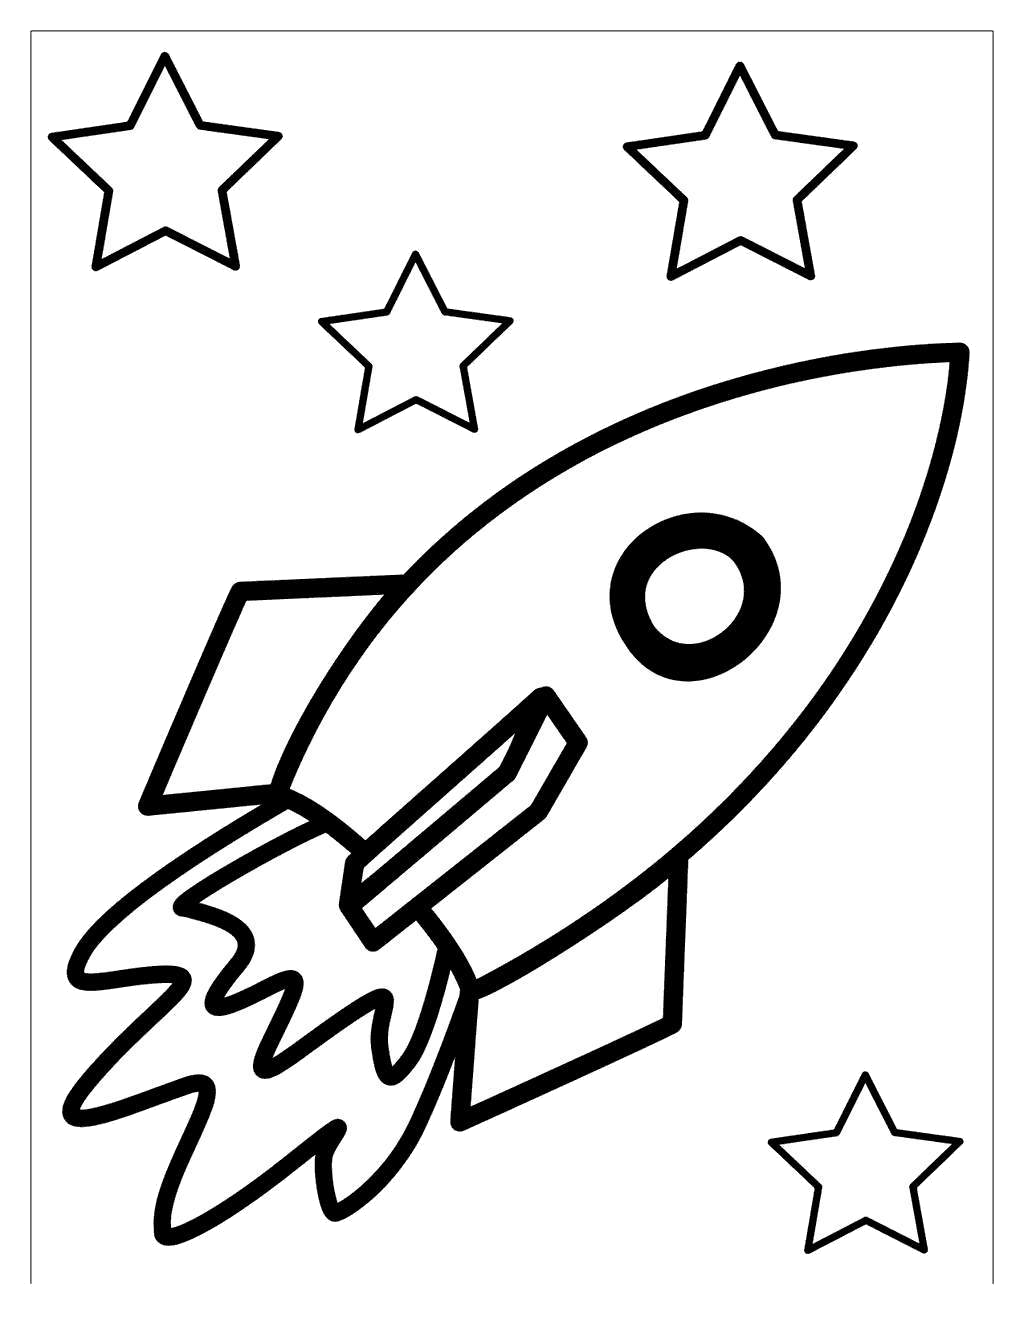 Rocketship clipart black and white, Rocketship black and white